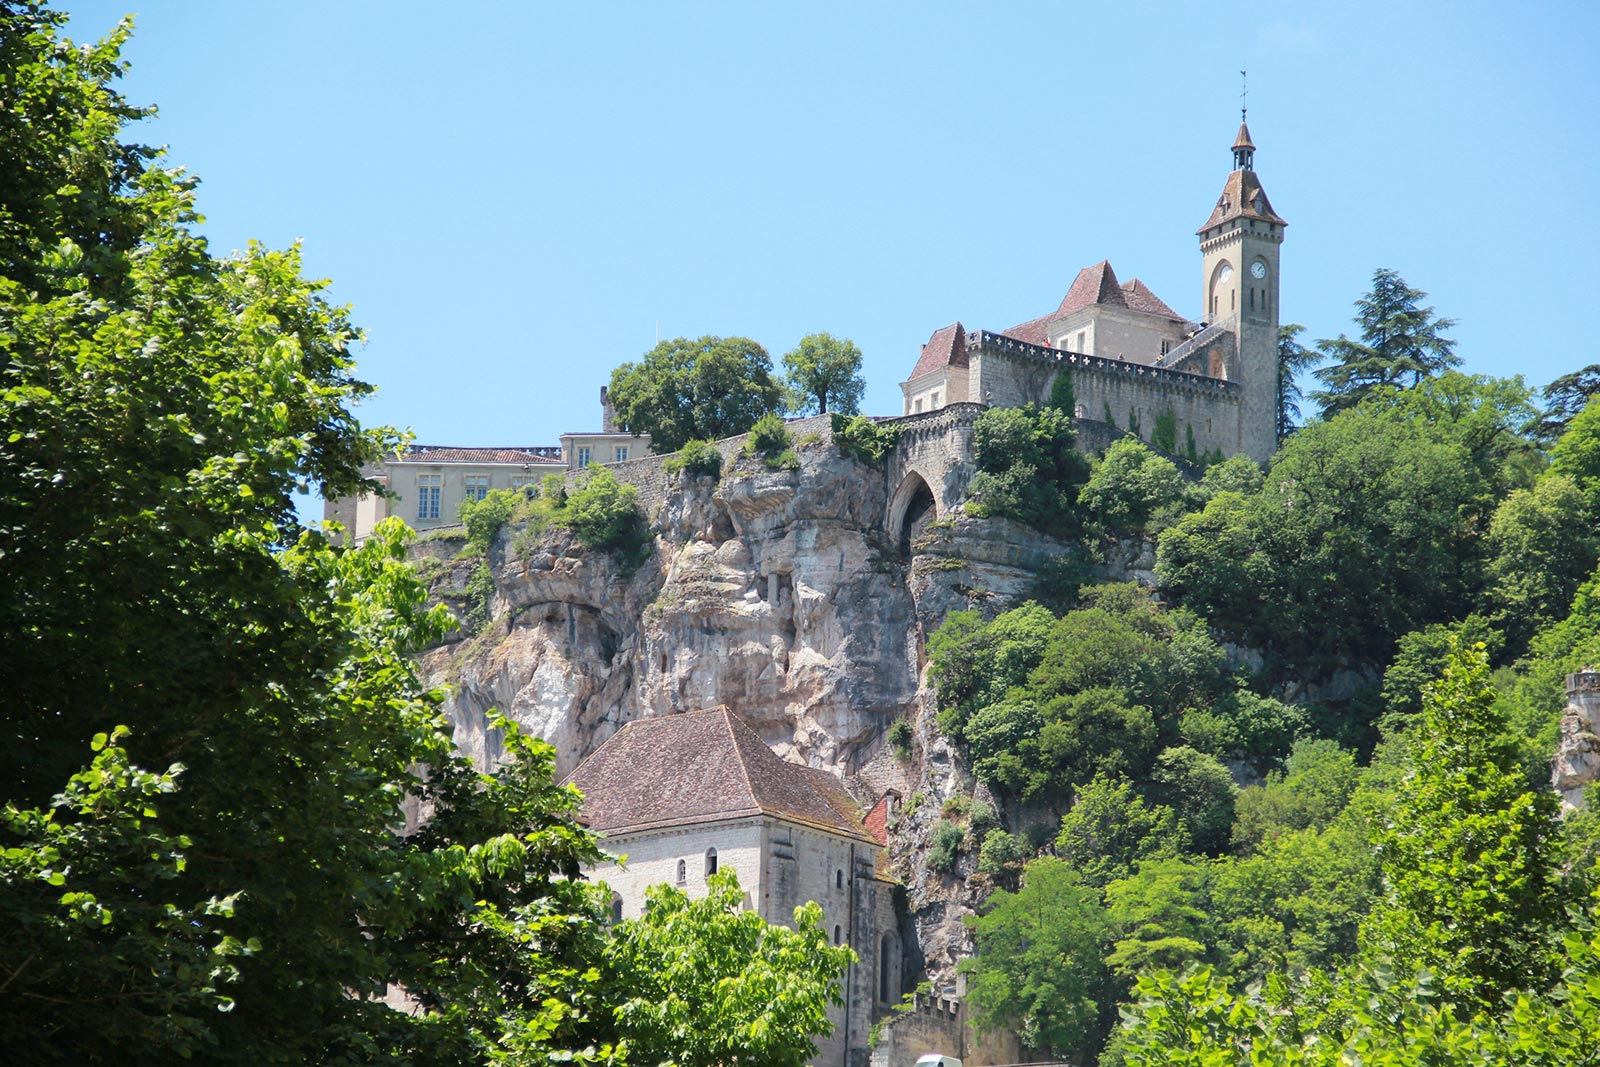 Holiday tips discover villages and places Lot (Occitania) France, Rocamadour Pilgrim.